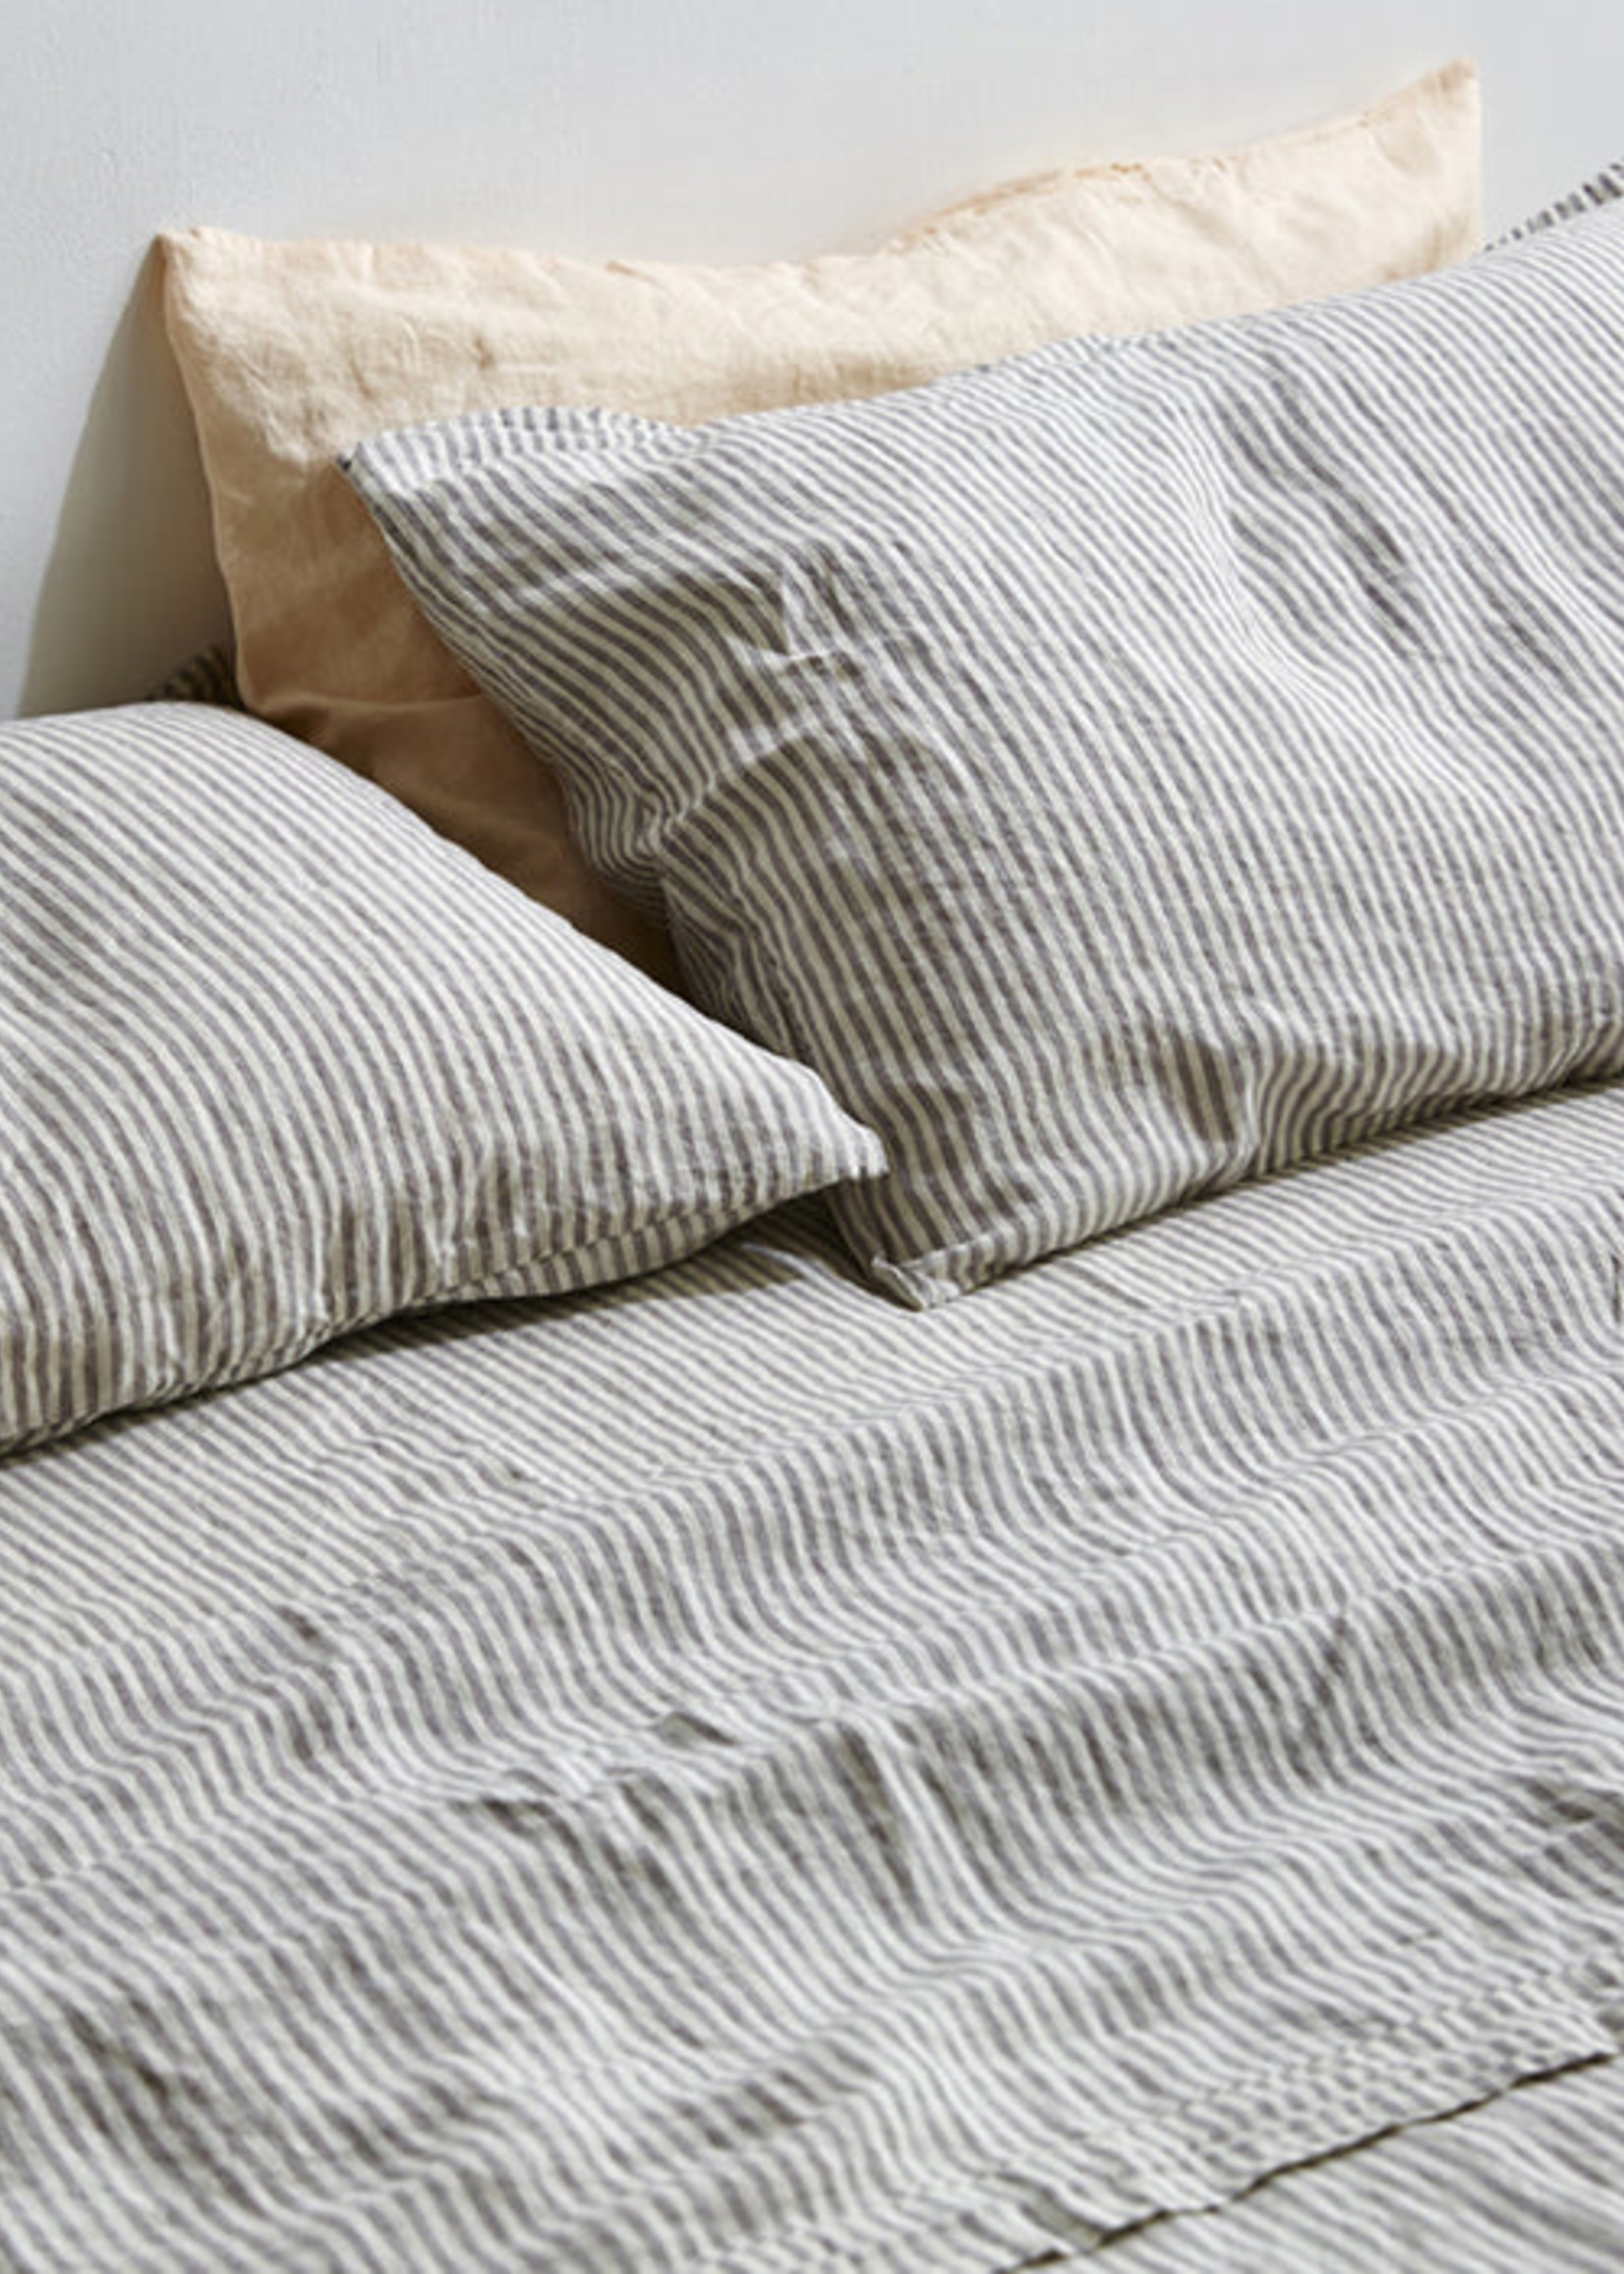 Linen Fitted Sheet in Grey & White Stripe